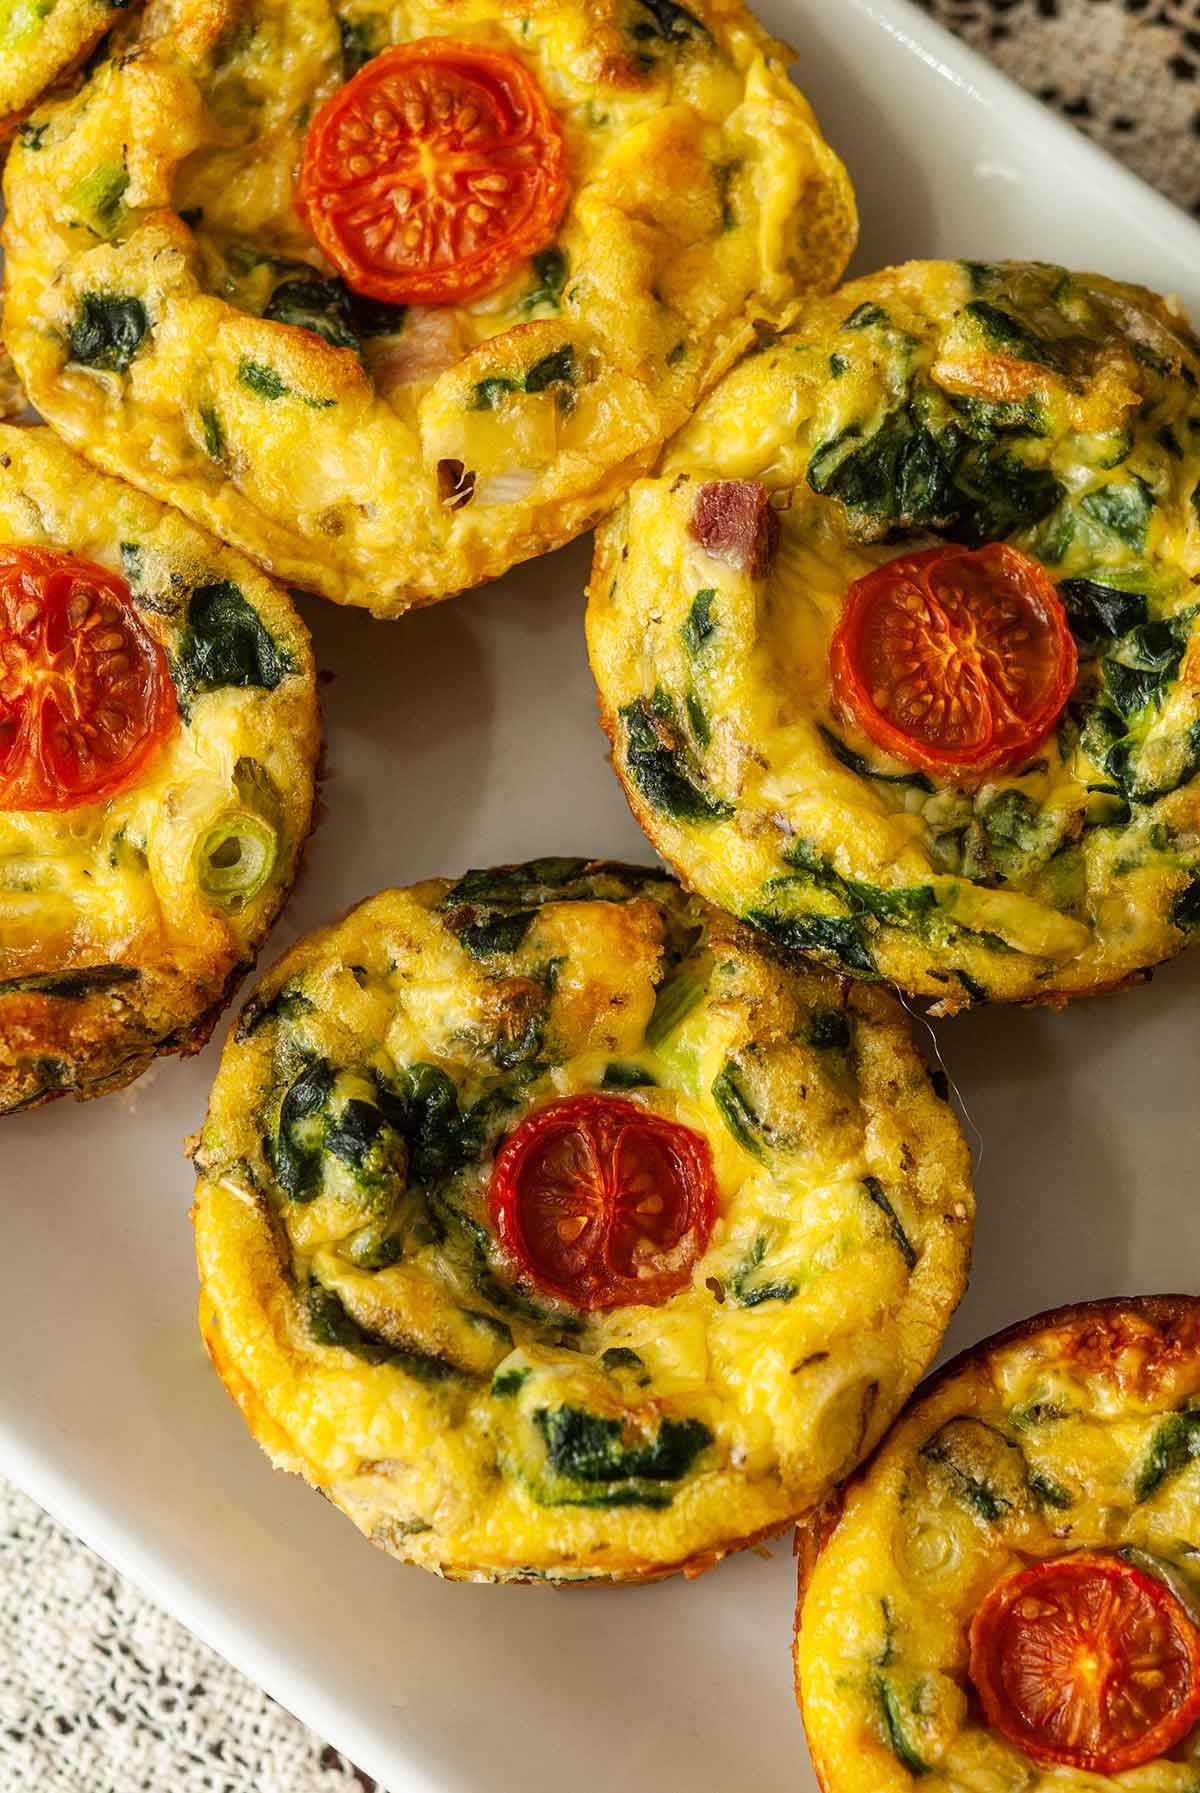 5 mini-quiches on a plate topped with tomatoes.